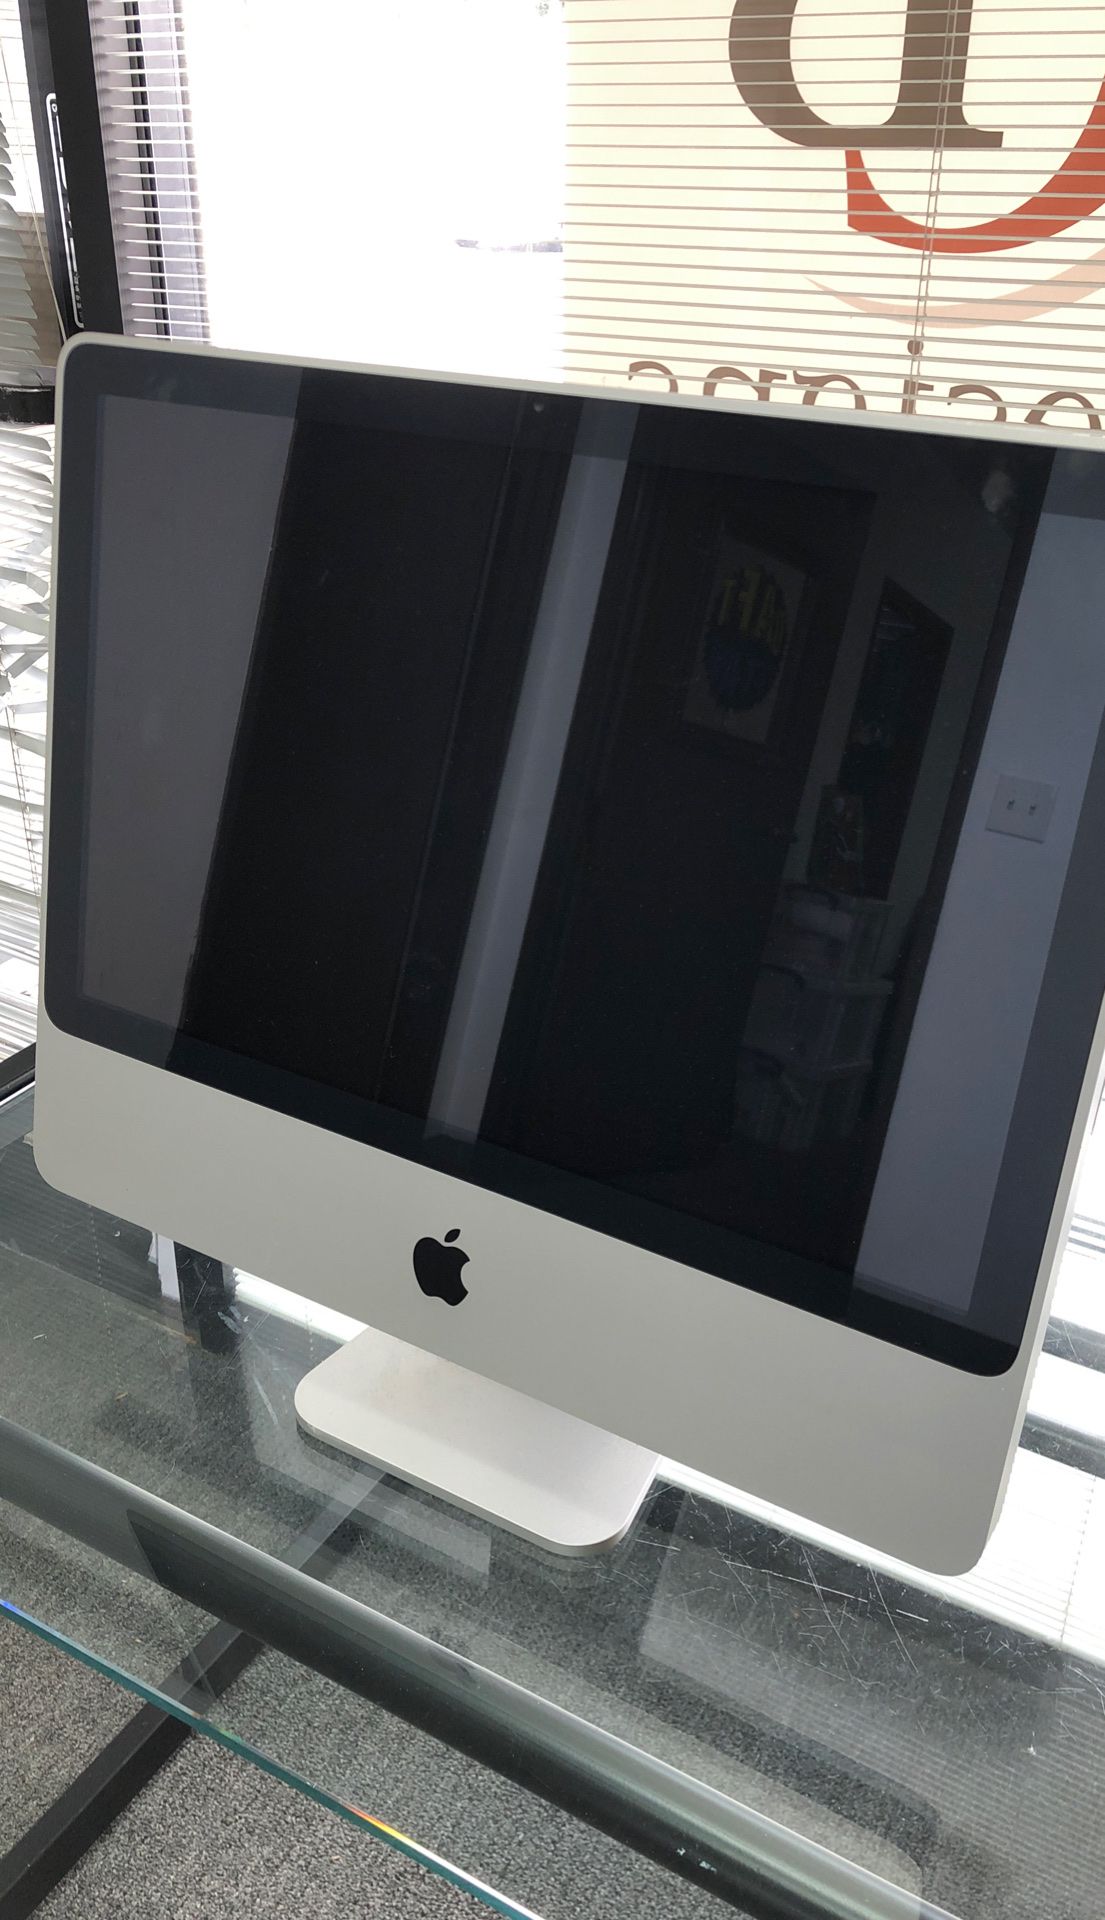 iMac 2008 upgraded and in mint condition